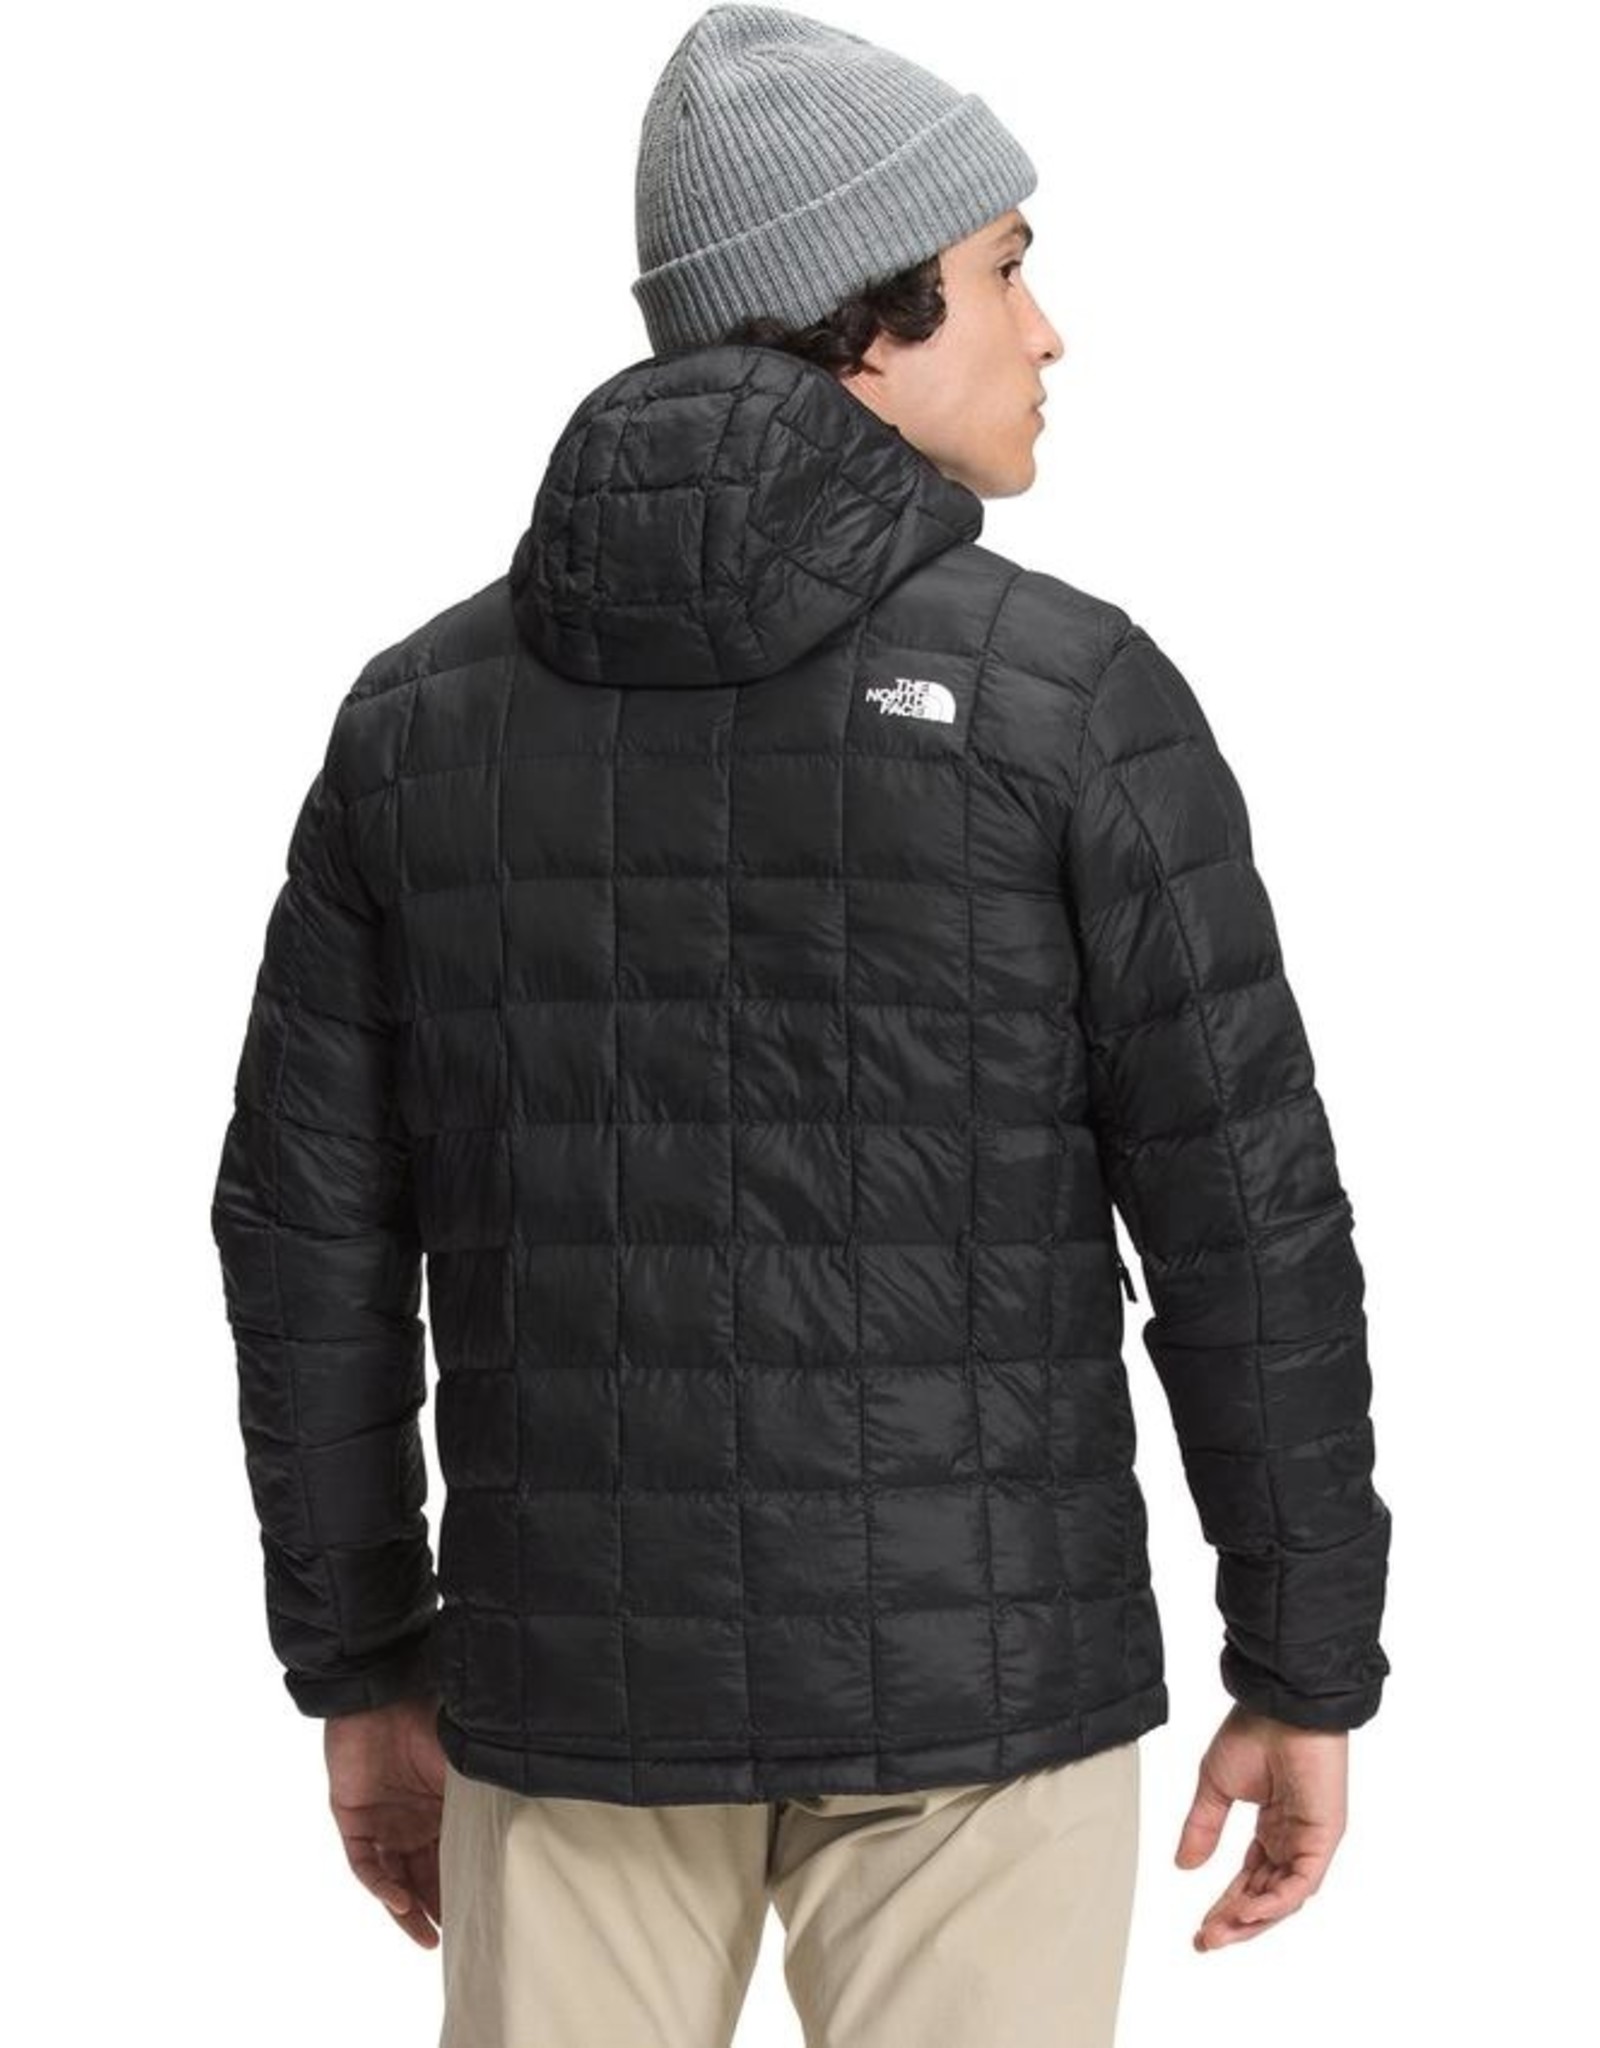 The North Face Tball Eco Jacket